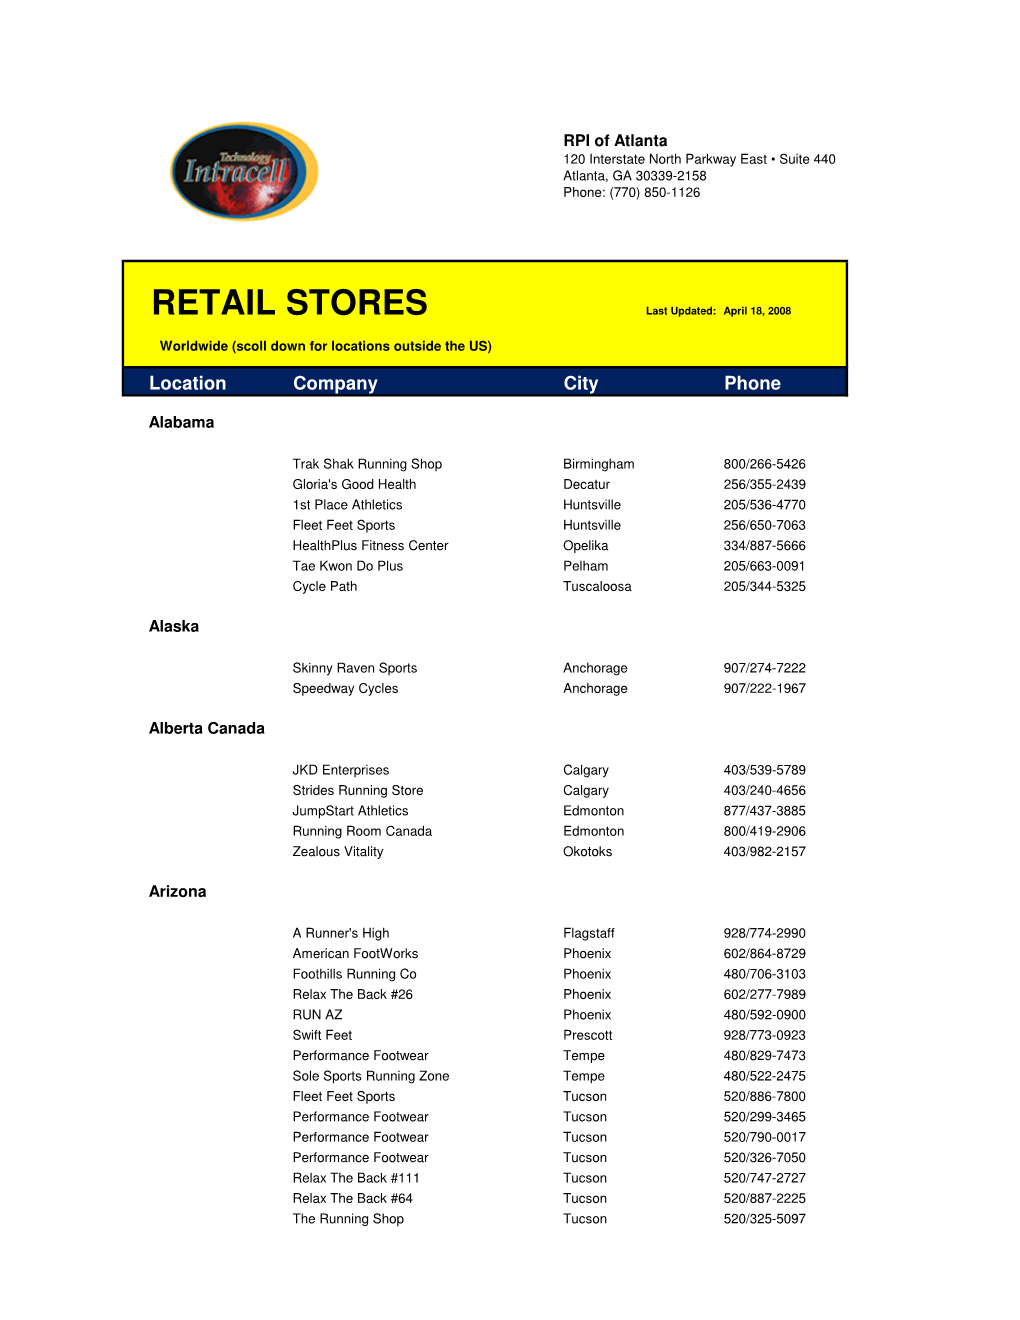 RETAIL STORES Last Updated: April 18, 2008